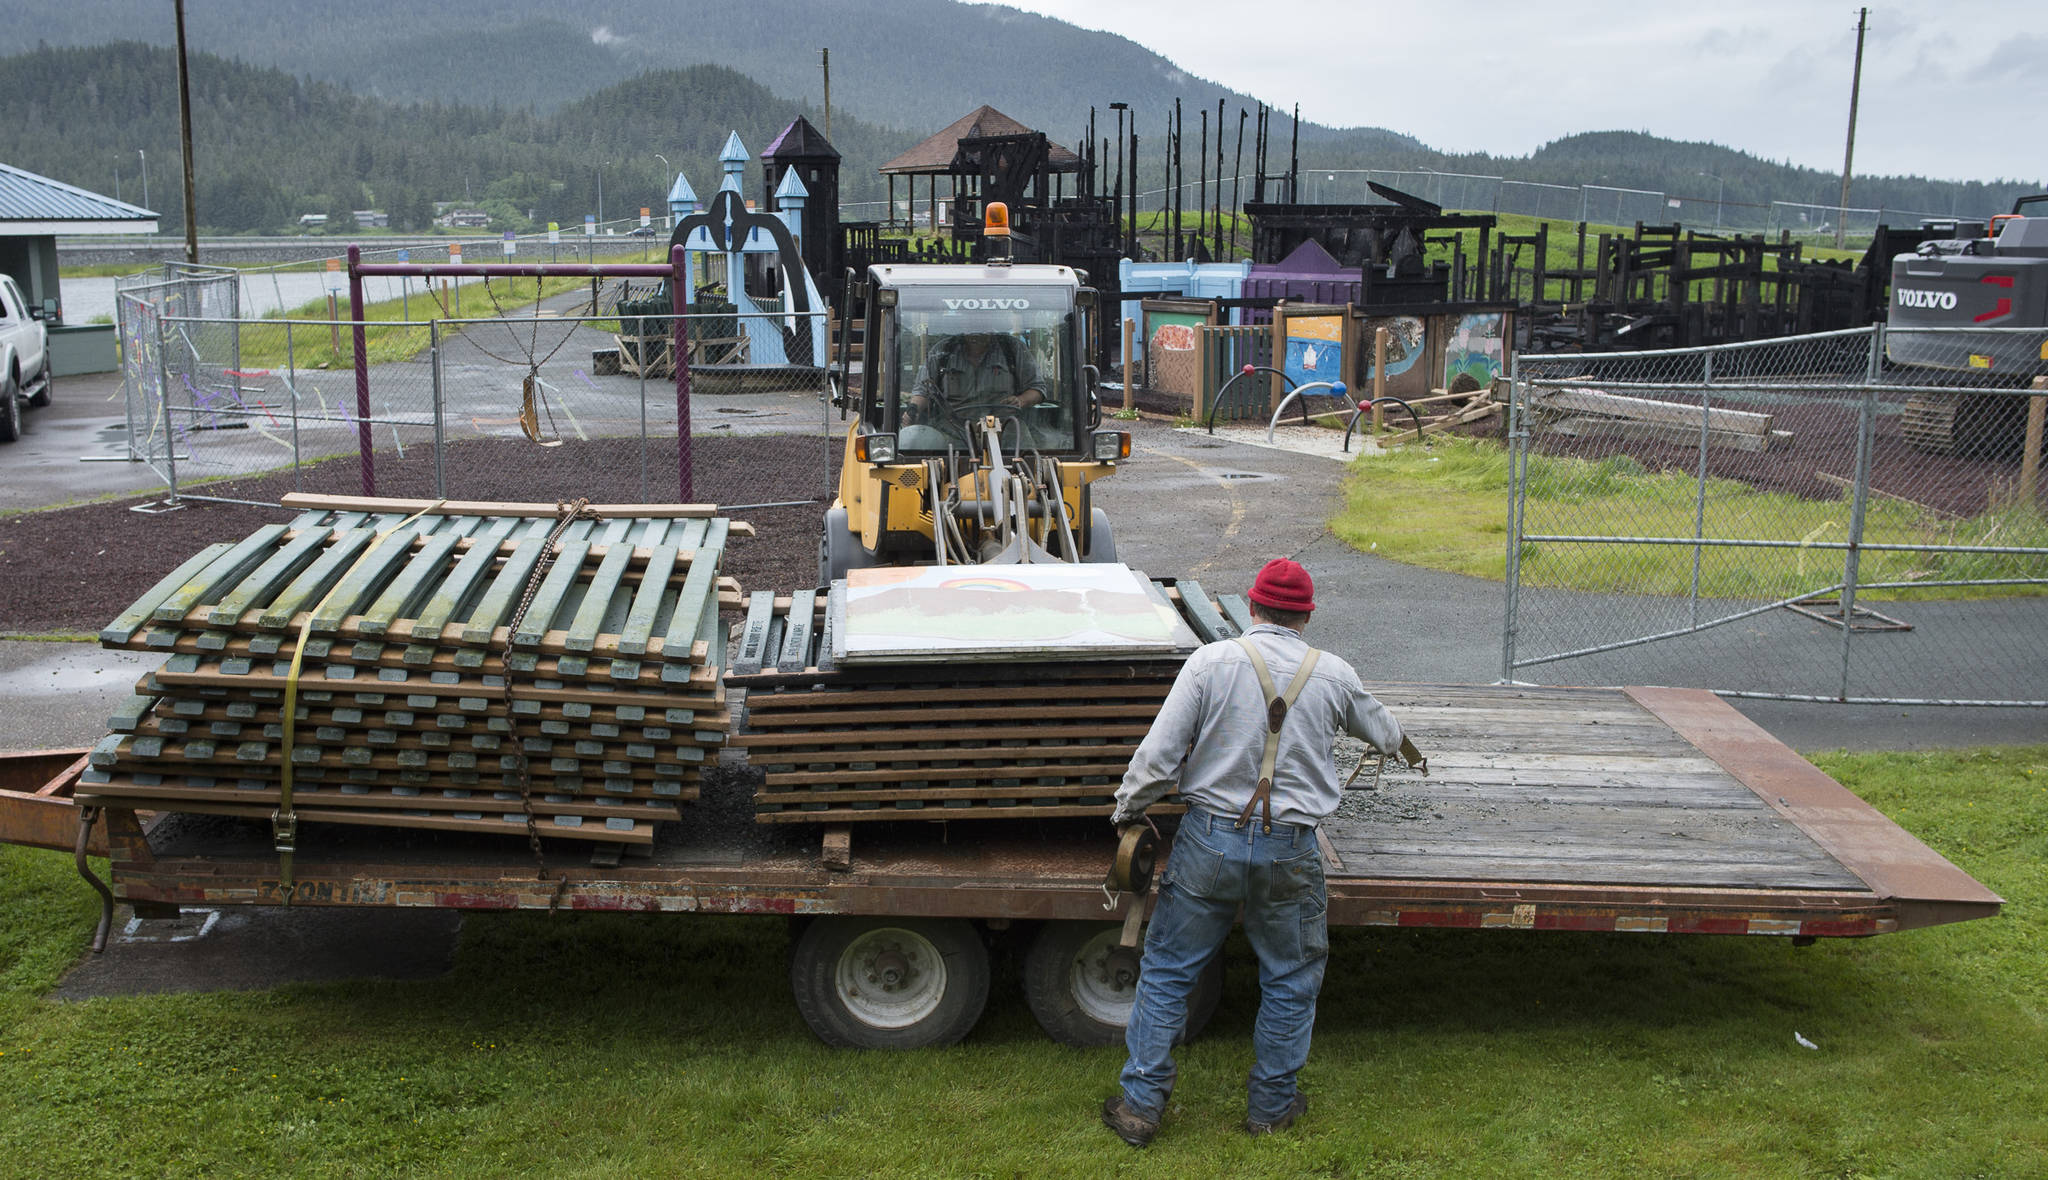 Sections of picket fence are loaded onto a flatbed trailer as work begins on the demolition of Project Playground at Twin Lakes on Tuesday, June 20, 2017. (Michael Penn | Juneau Empire)